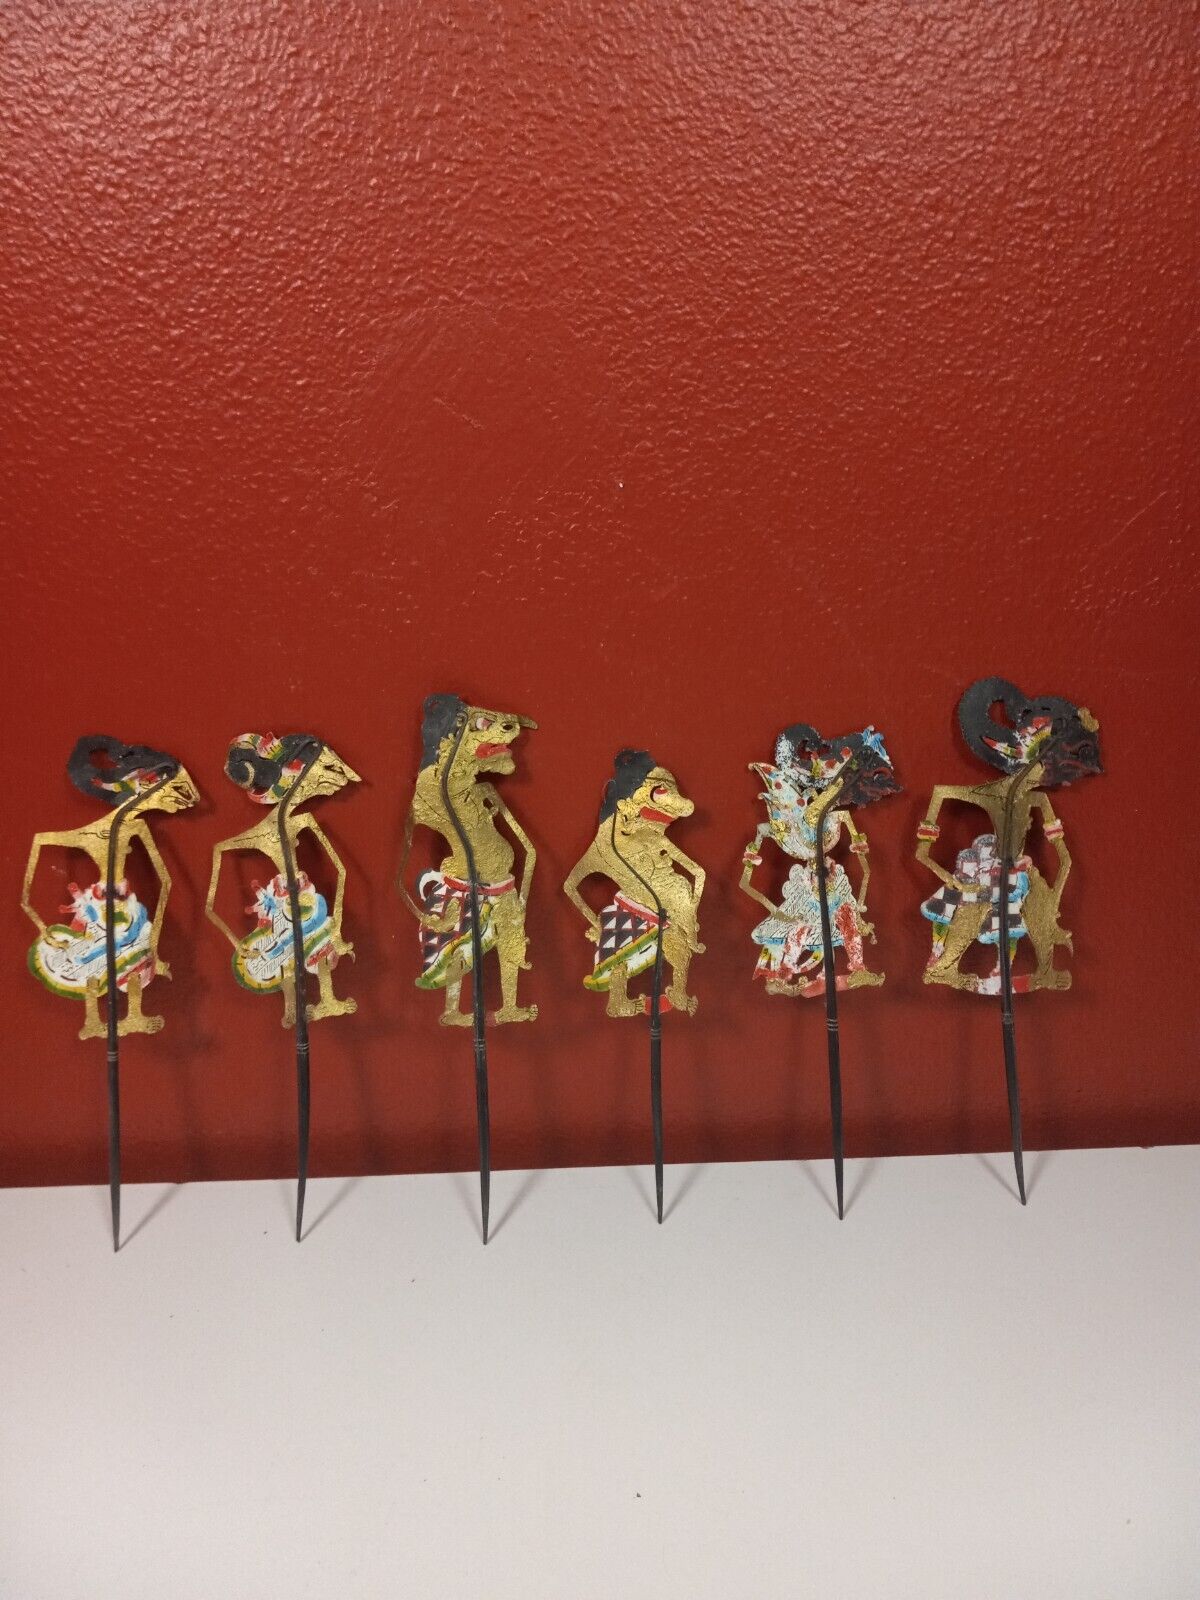 Super Cool set of 6 Vintage Stick Puppets Hand-Painted Indonesian?